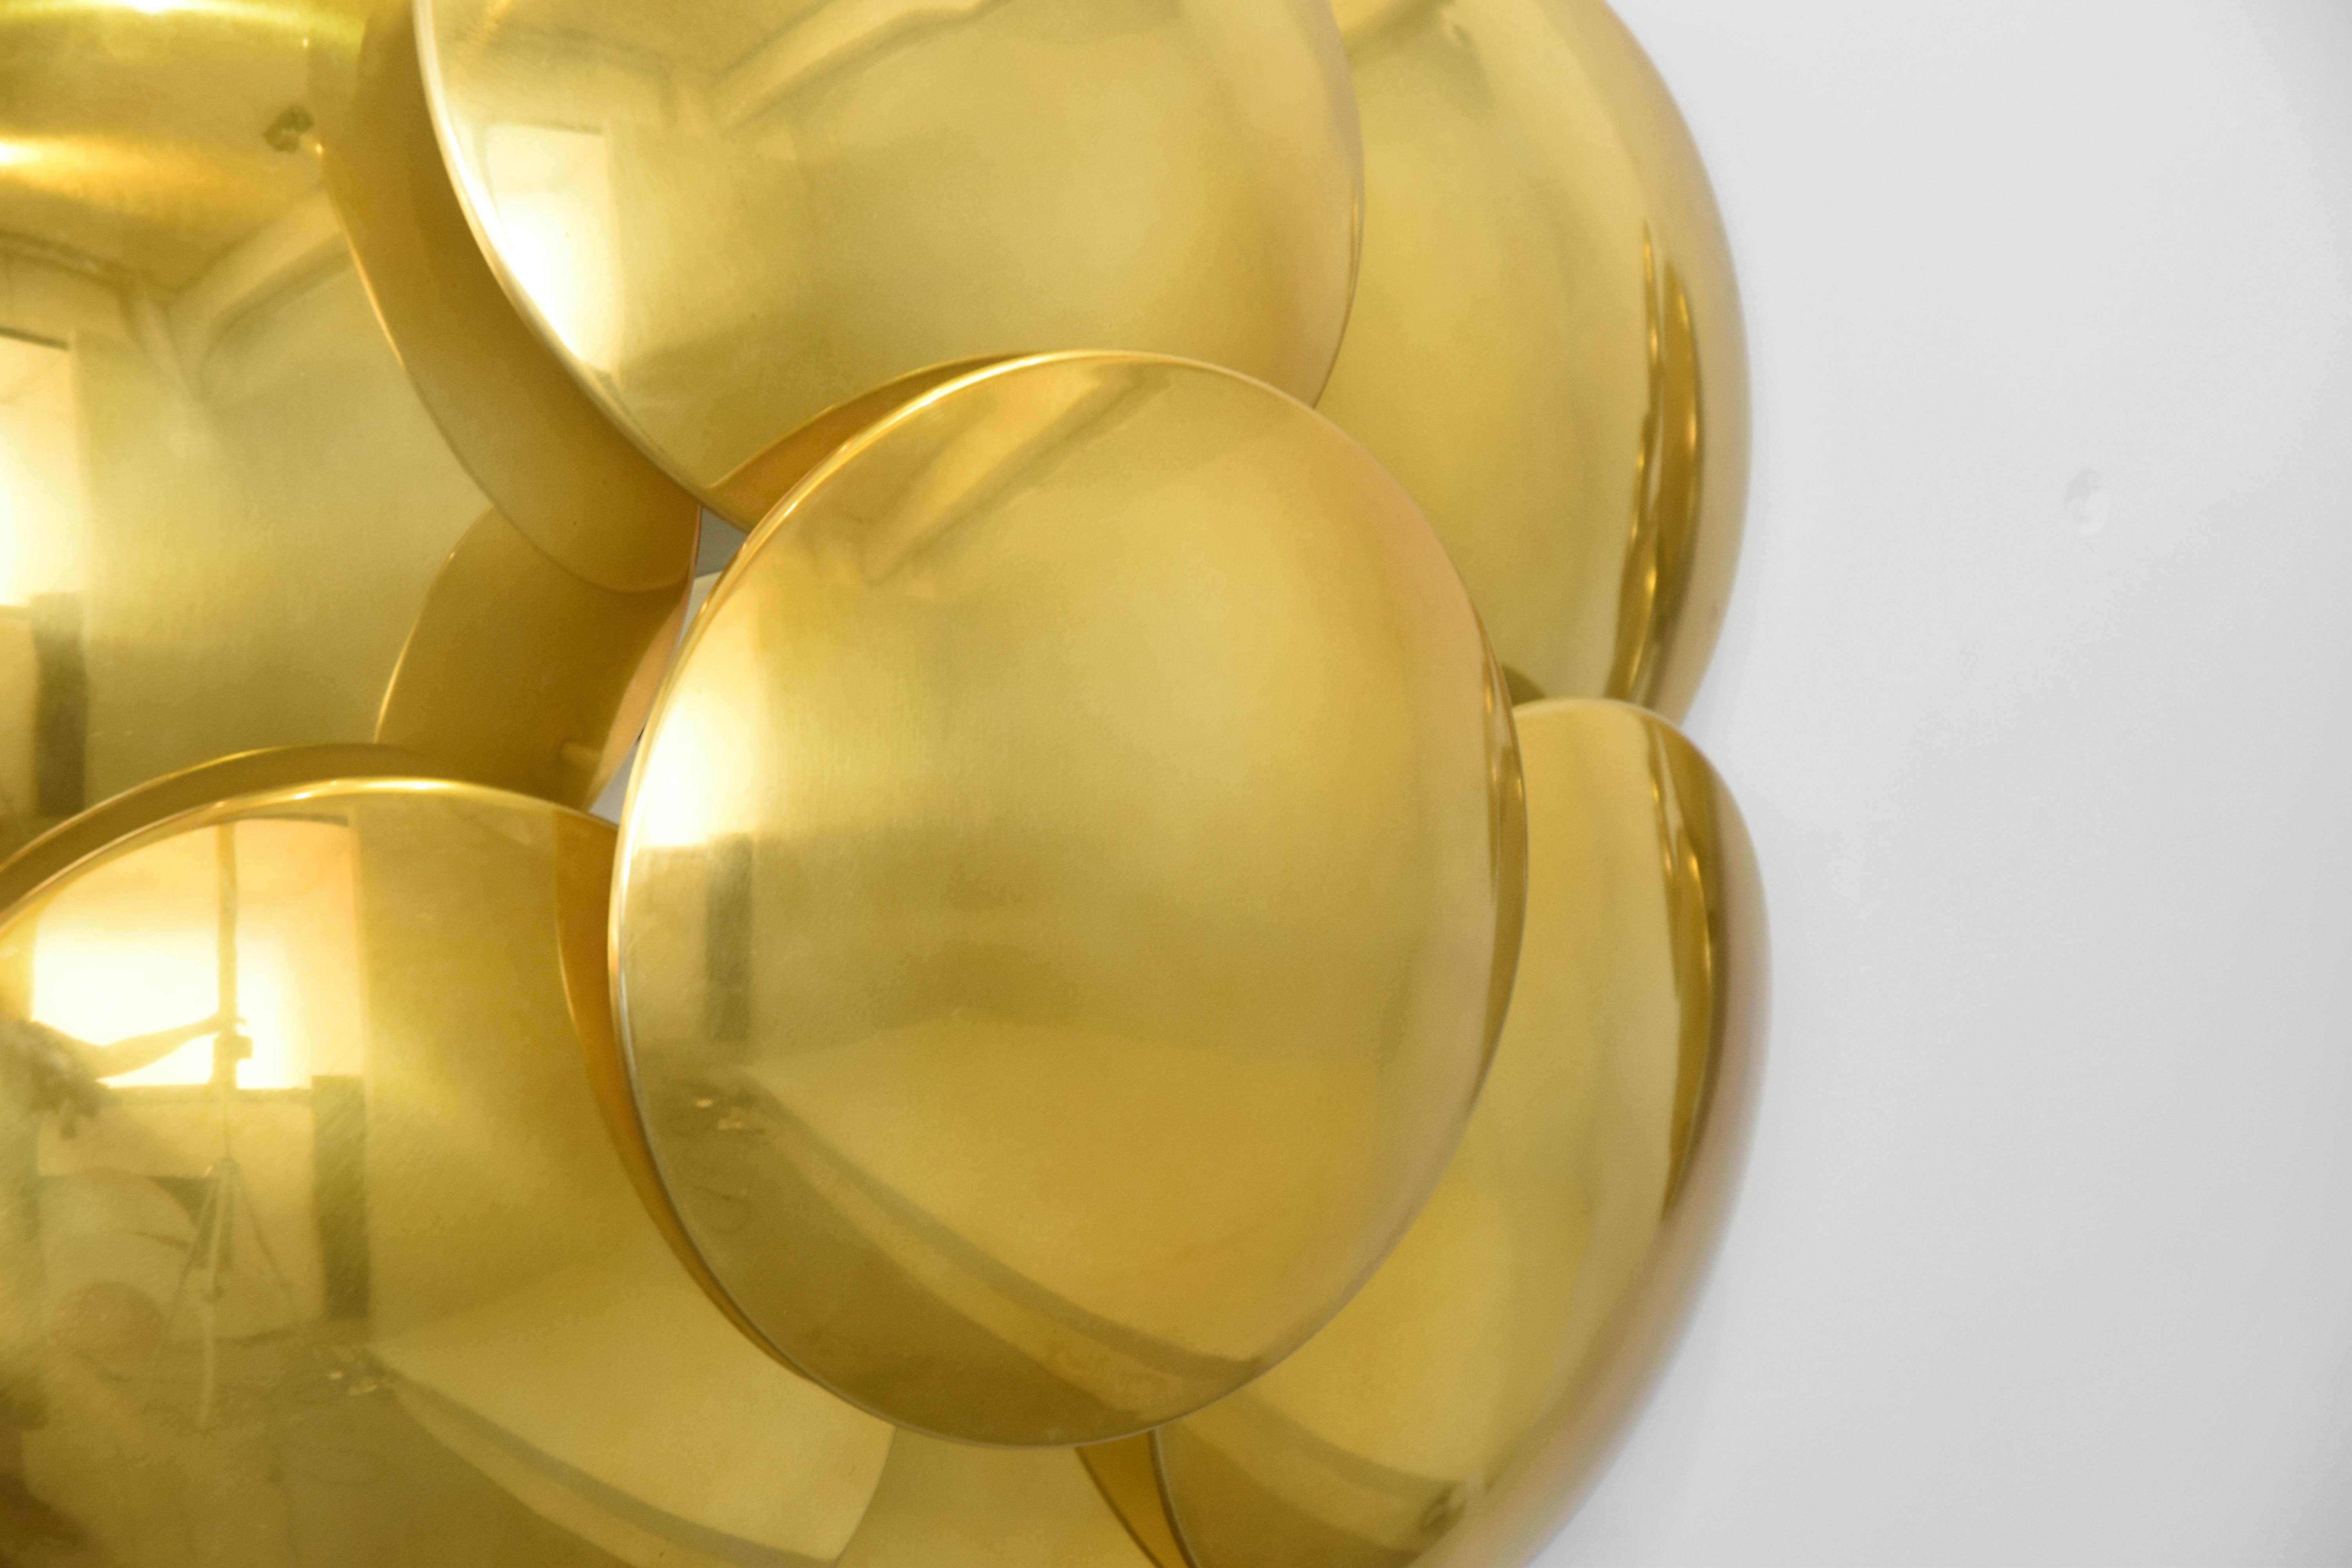 Incredible Rare Pair of Gilded Metal Wall Lights Design Goffredo Reggiani composed of seven gilded aluminum discs.
Very rare sconces in perfect working condition with original label of the time